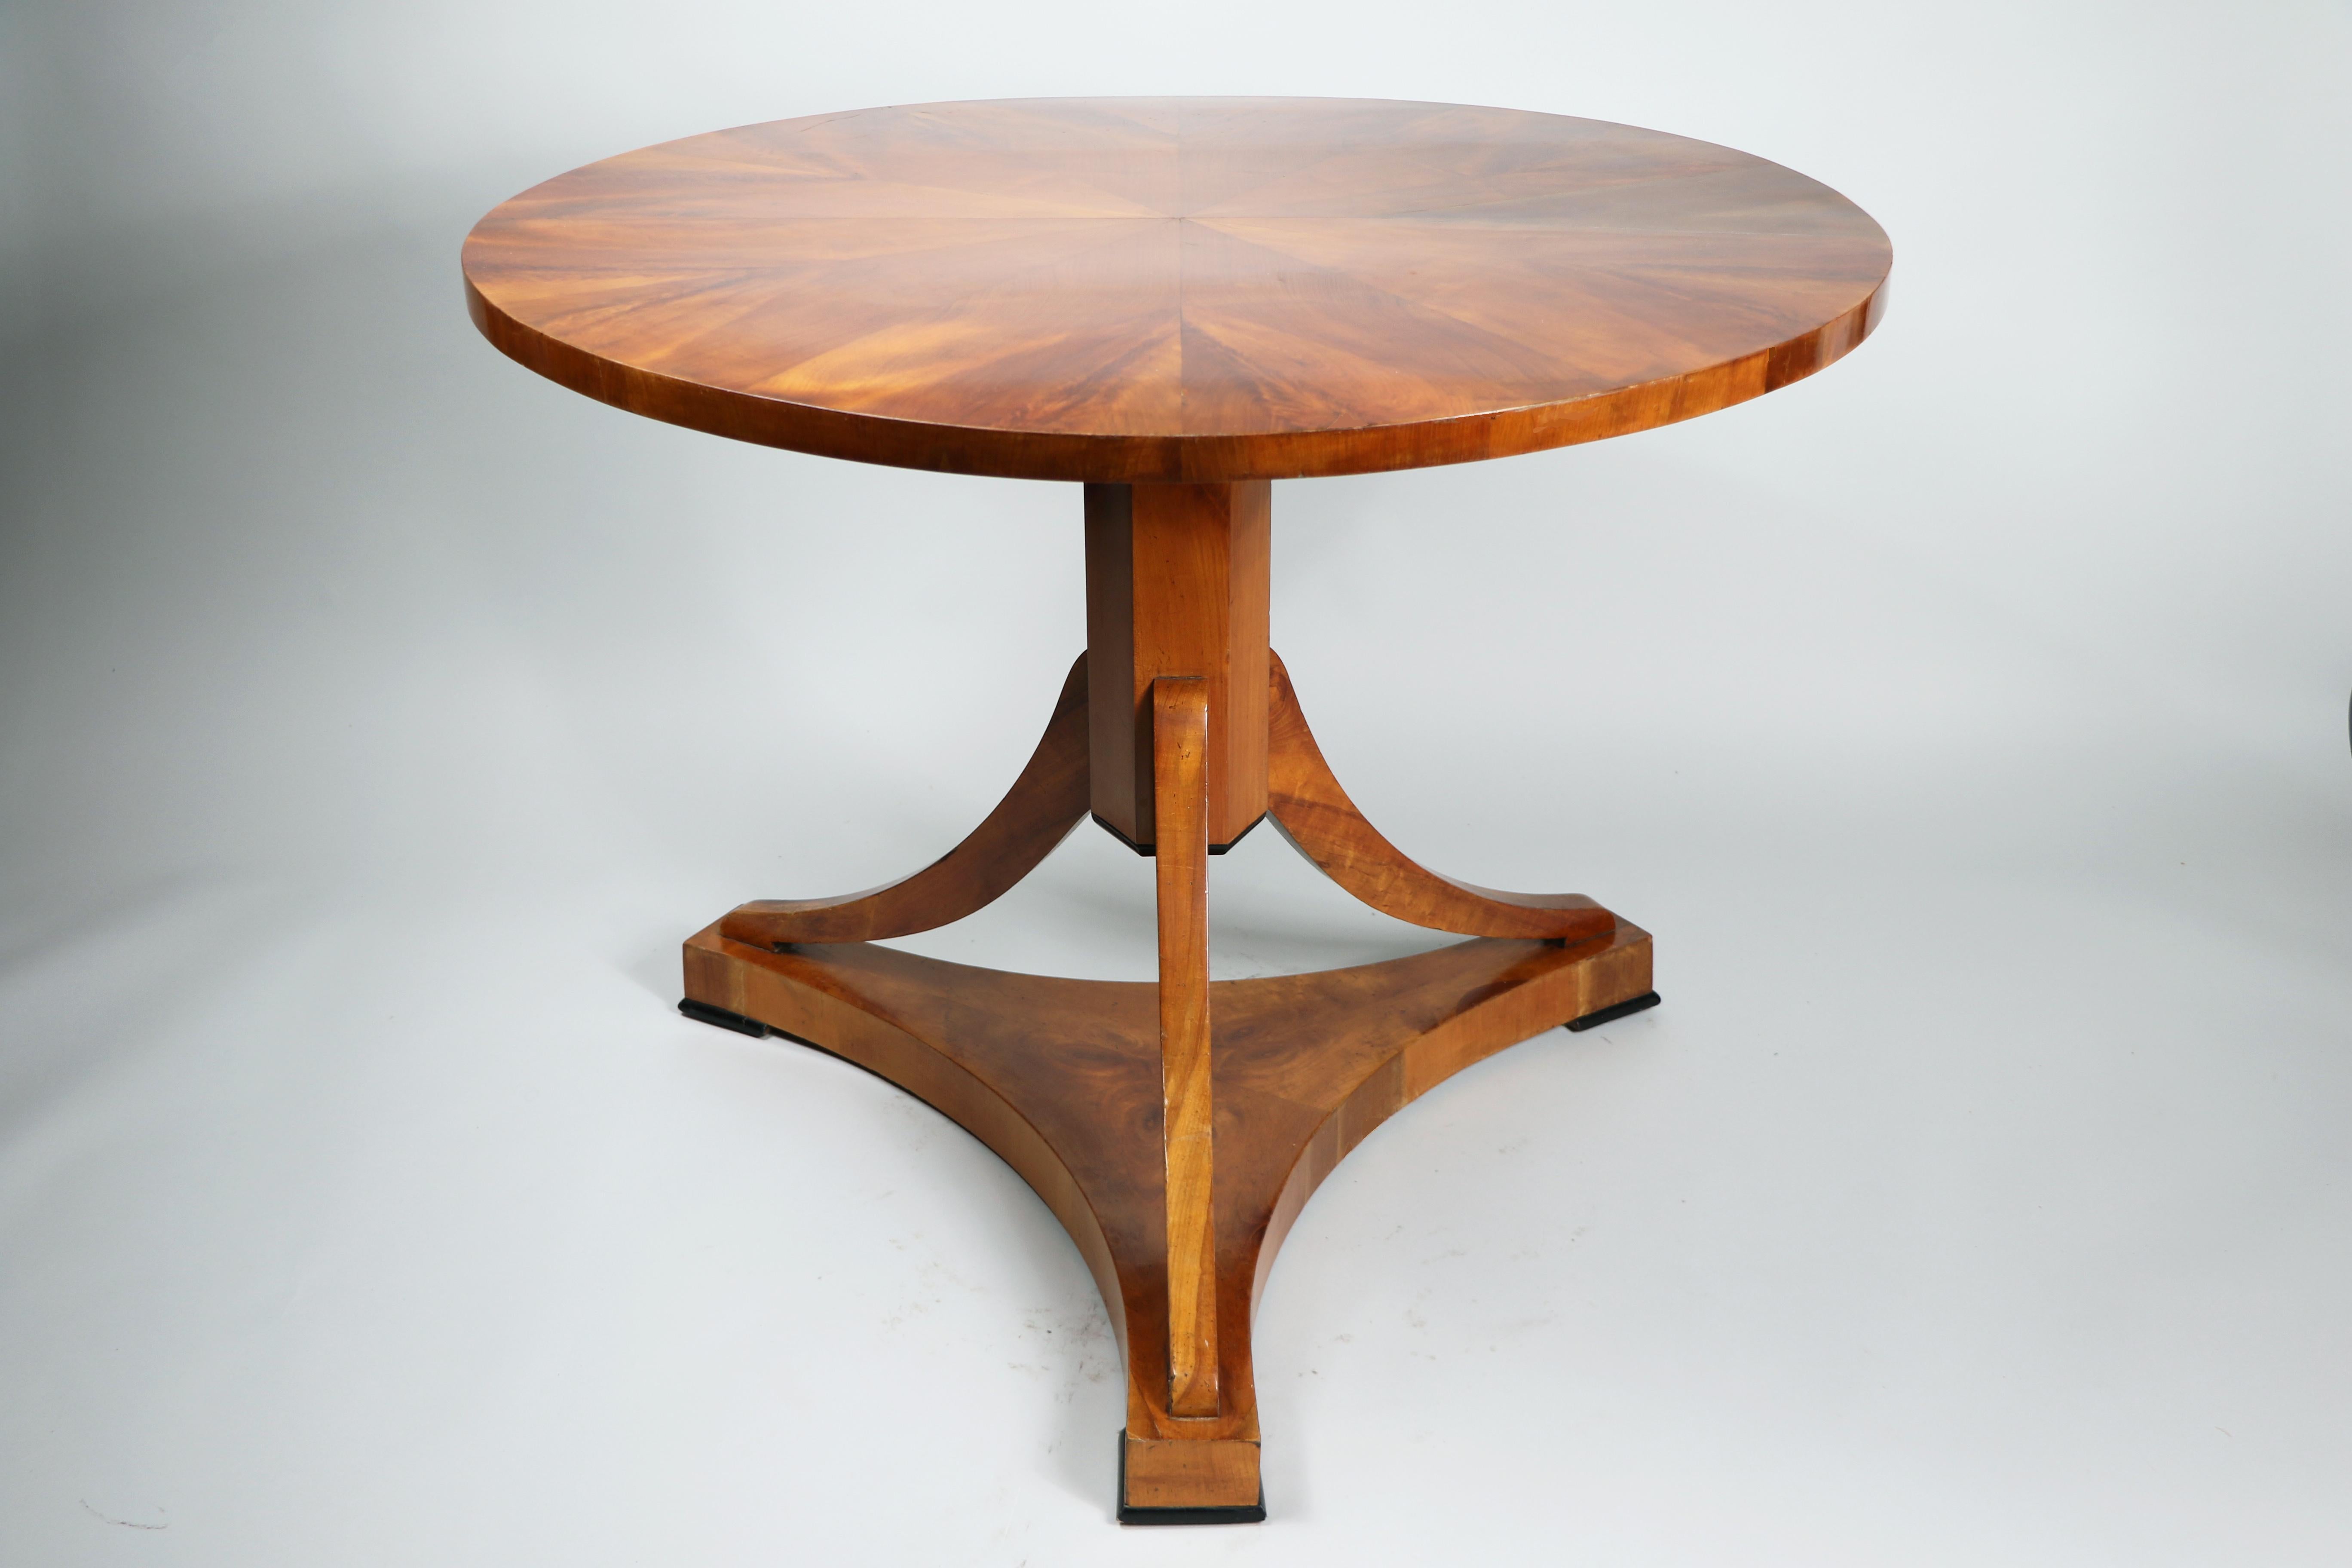 Hello,

This elegant Biedermeier cherry table was made in Vienna circa 1825-30.

Viennese Biedermeier pieces are distinguished by their sophisticated proportions, rare and refined design, excellent craftsmanship and continue to have a great